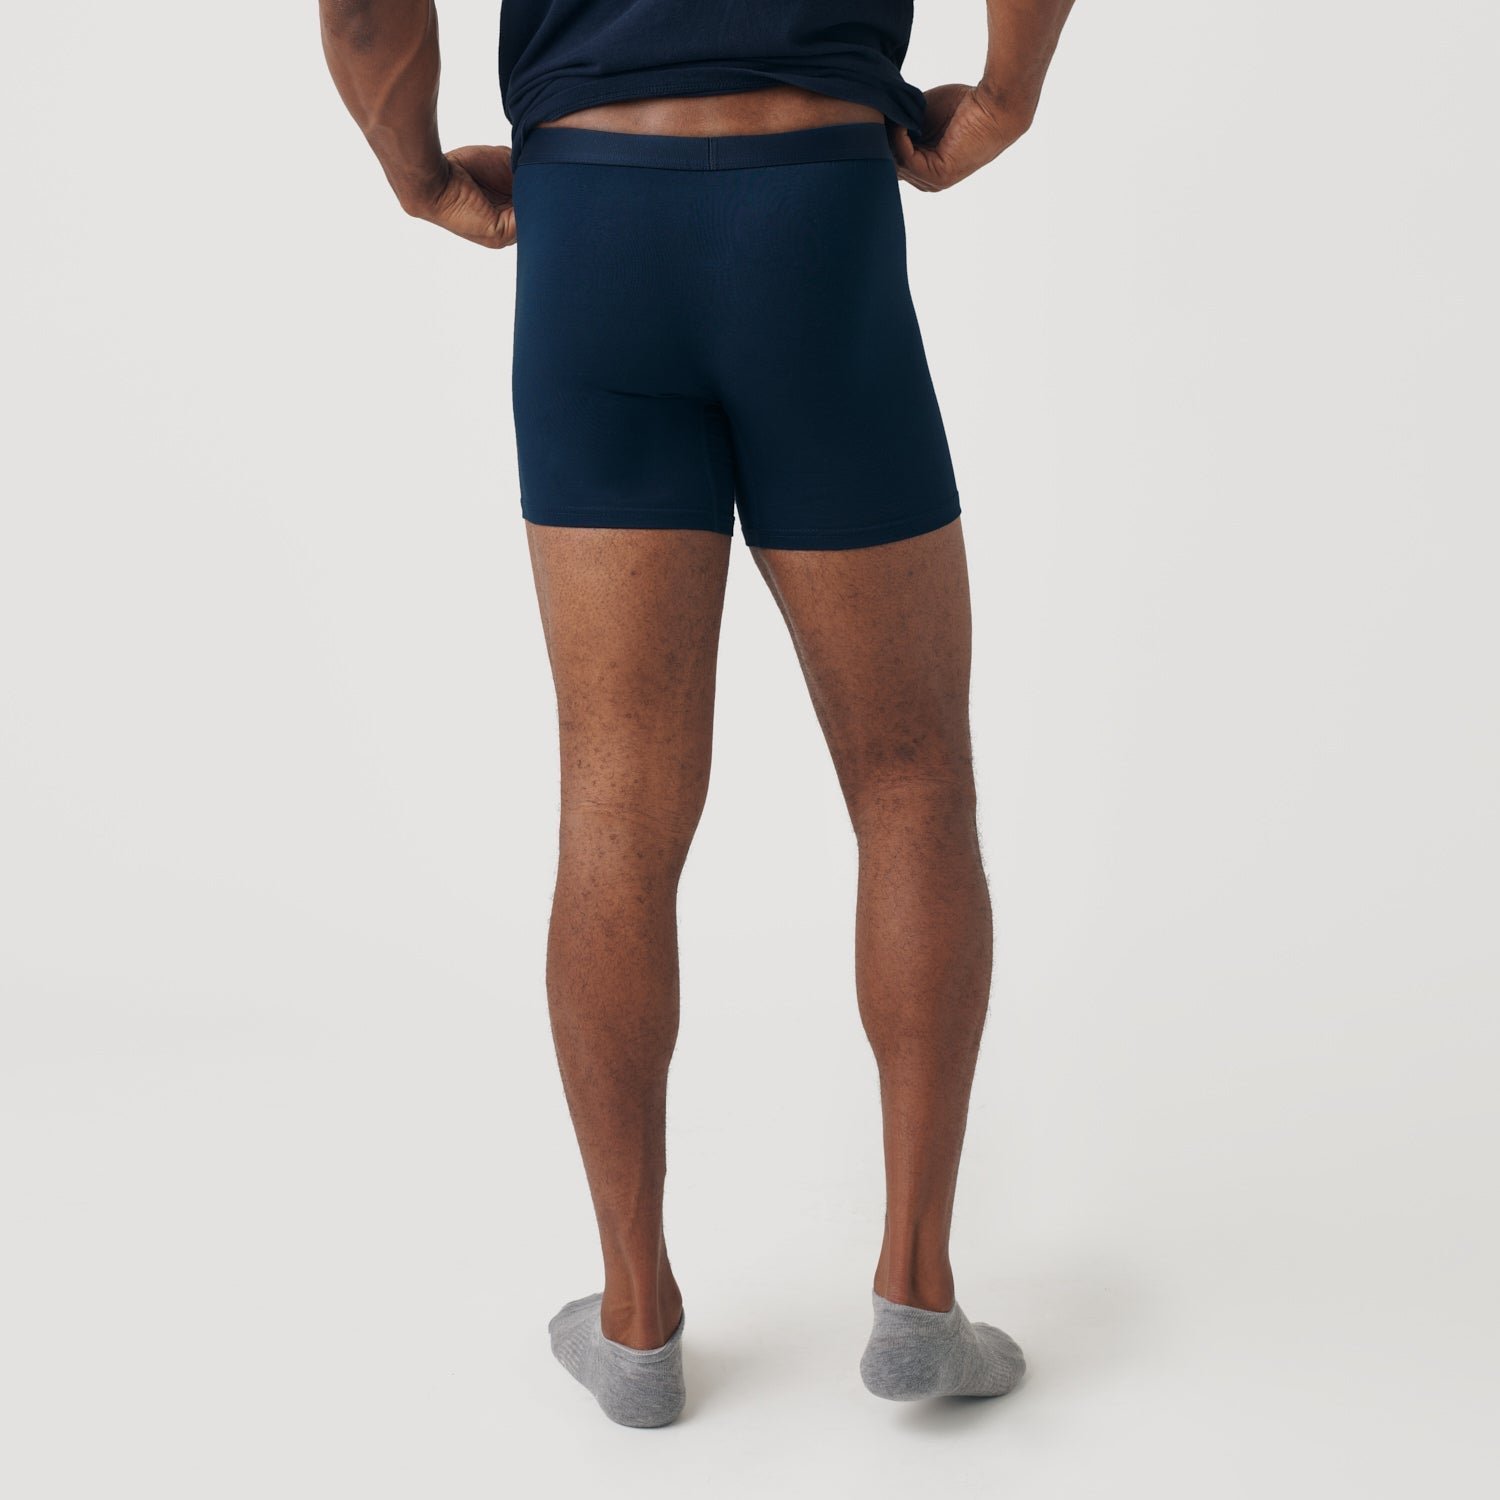 Navy Boxer Brief 6-Pack